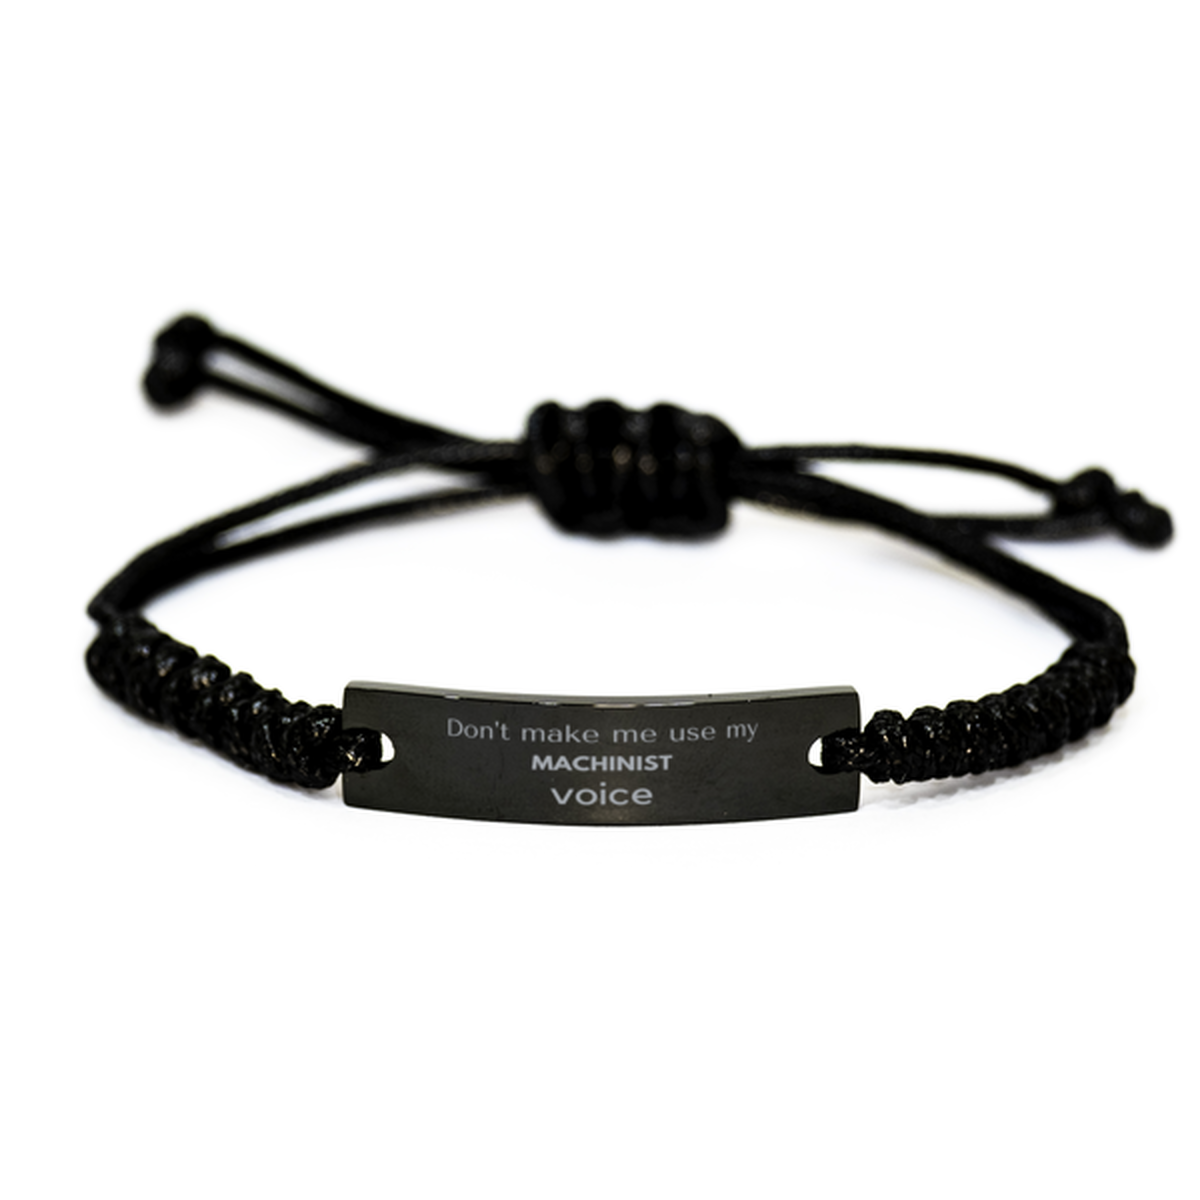 Don't make me use my Machinist voice, Sarcasm Machinist Gifts, Christmas Machinist Black Rope Bracelet Birthday Unique Gifts For Machinist Coworkers, Men, Women, Colleague, Friends